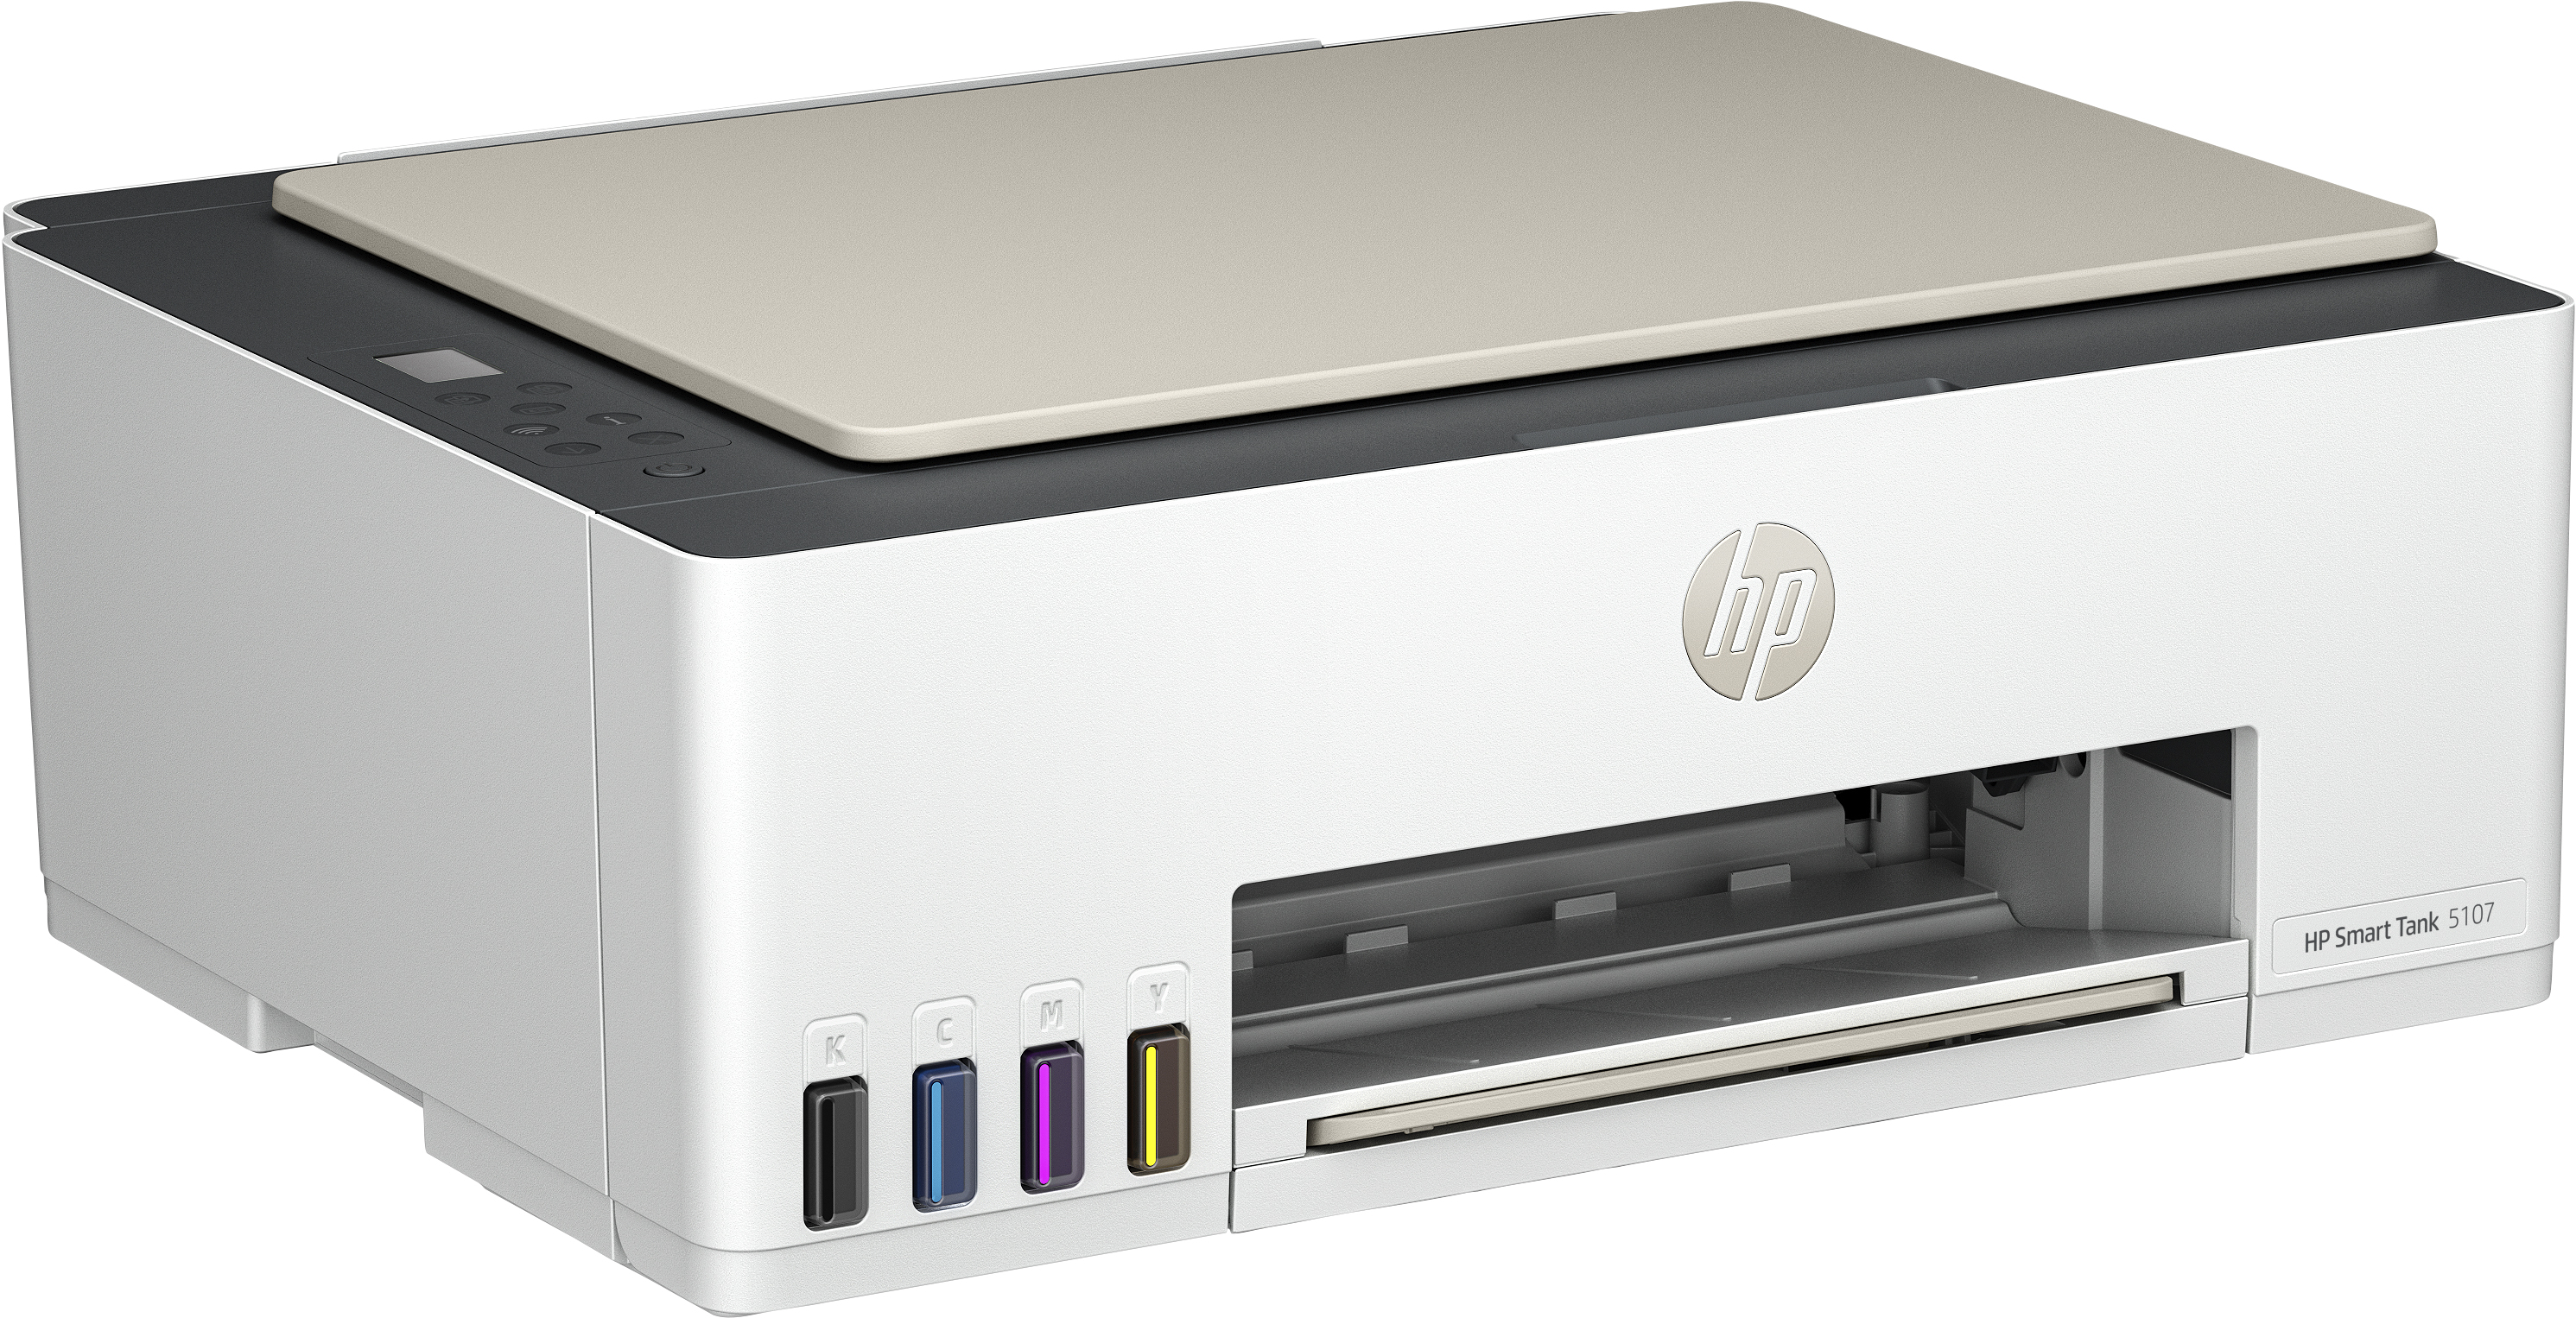 HP Smart Tank 5107 All-in-one up to 12ppm